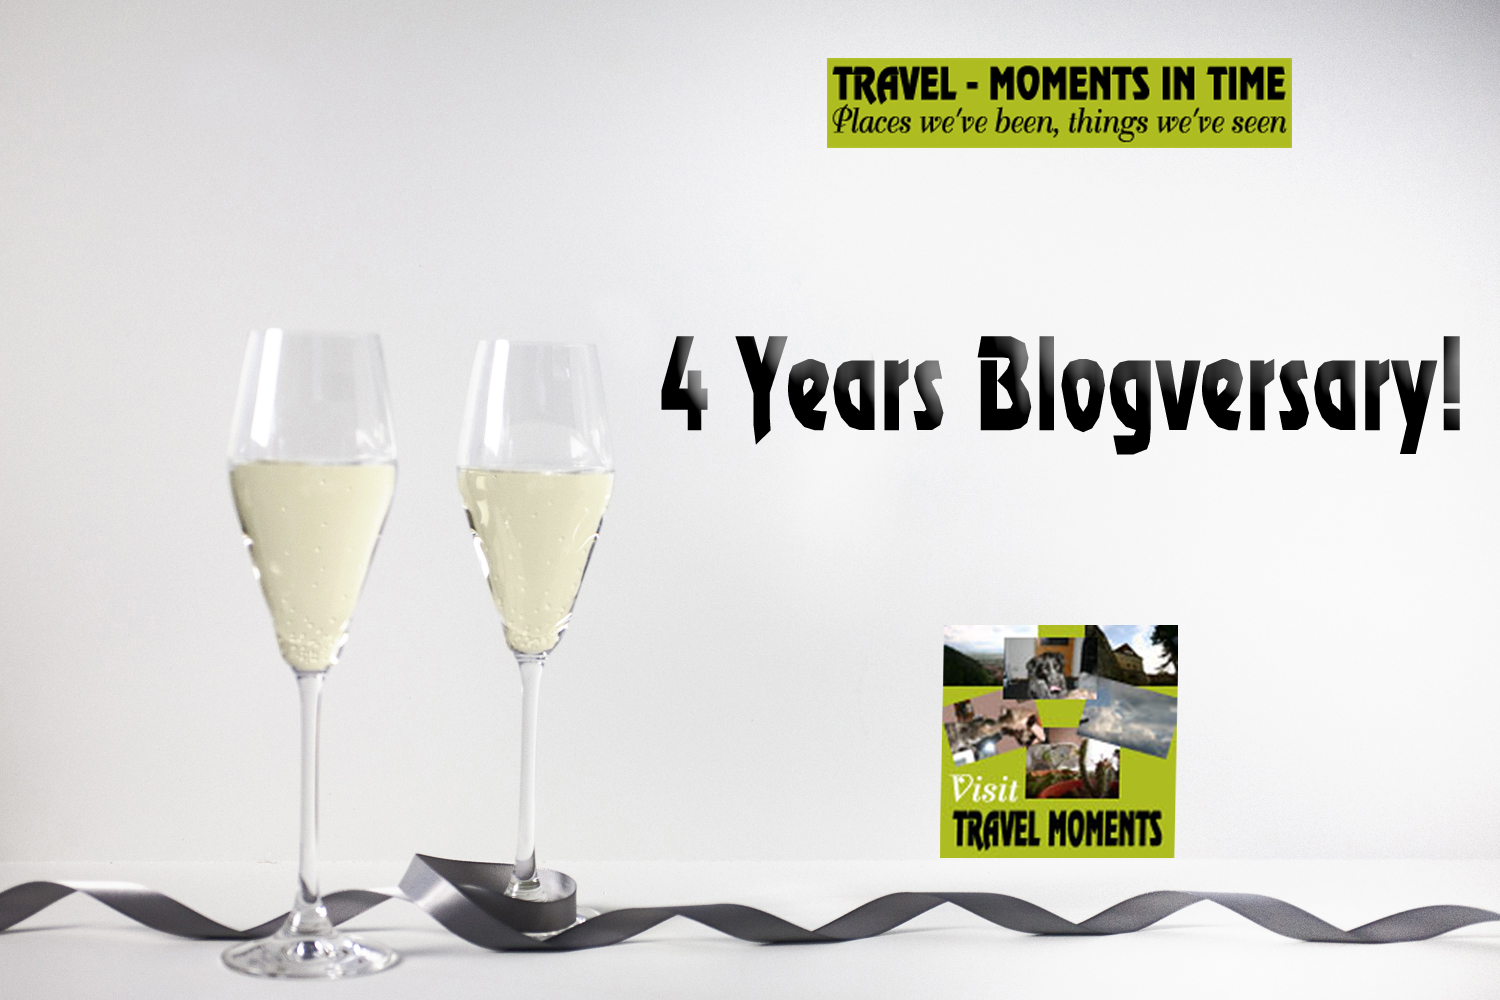 Travel - Moments in Time - 4 Years Blogversaryy